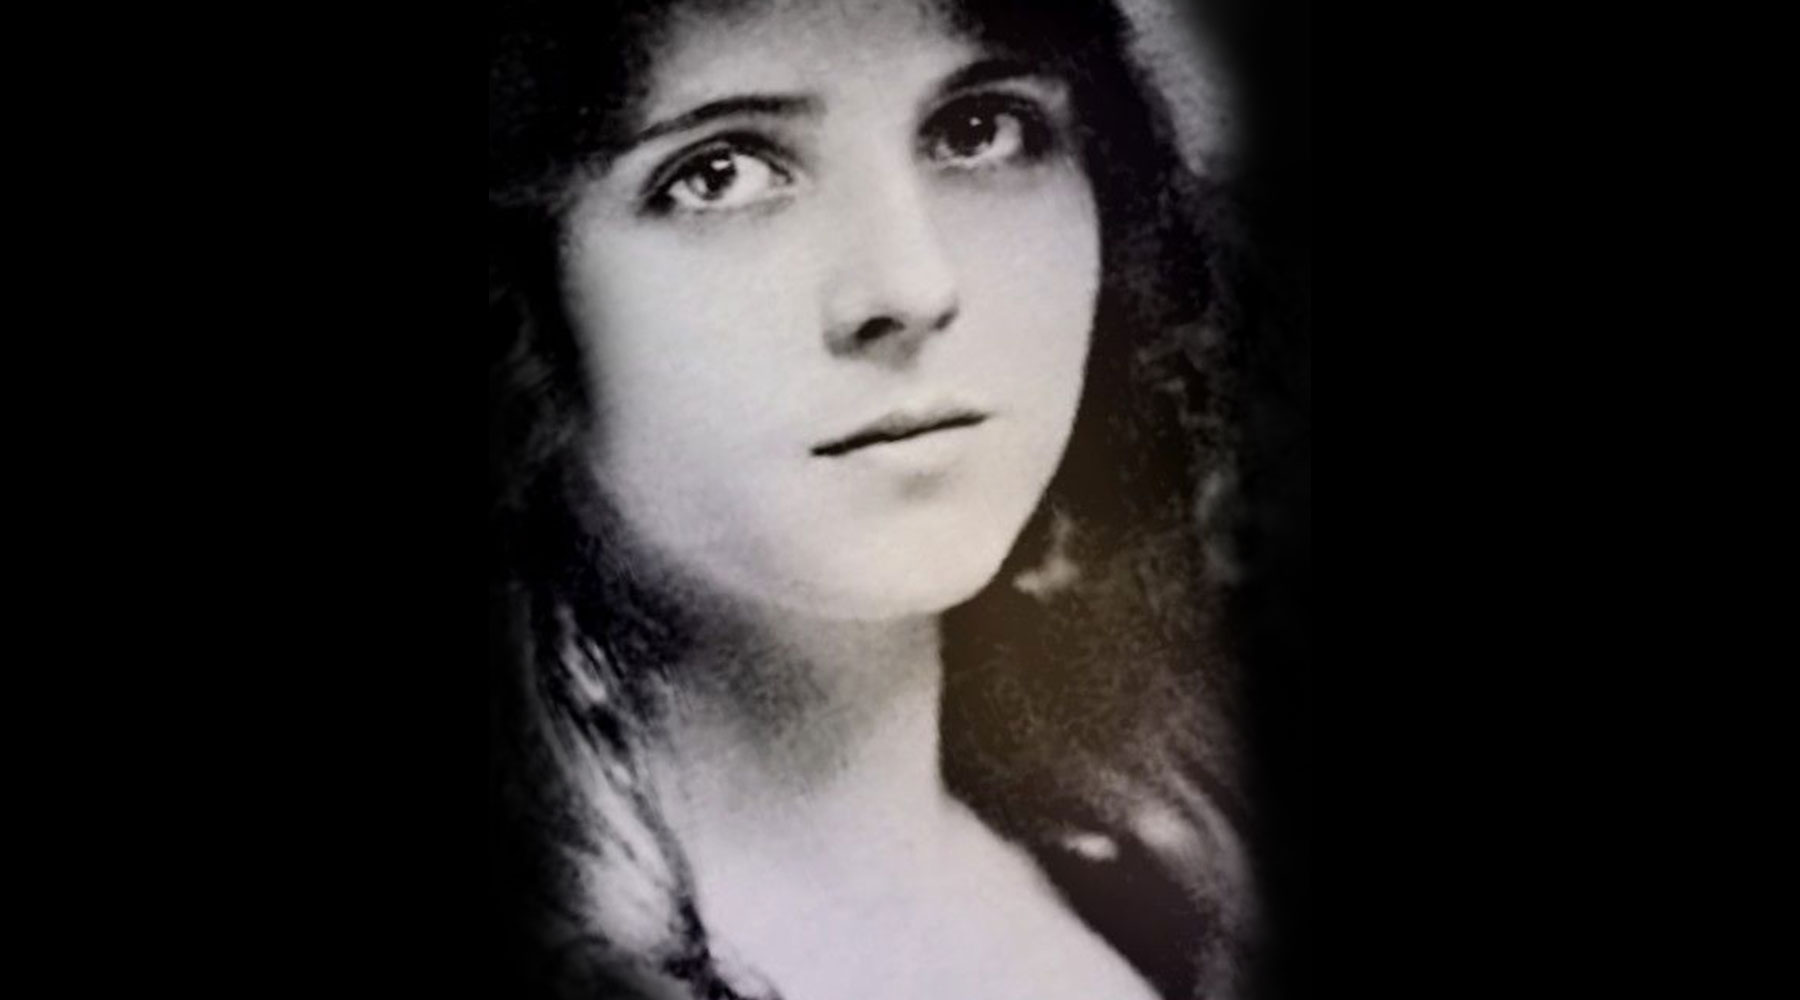 Olive Thomas was born poor in Charleroi, Pennsylvania. Olive left school at 15 to help support her family.